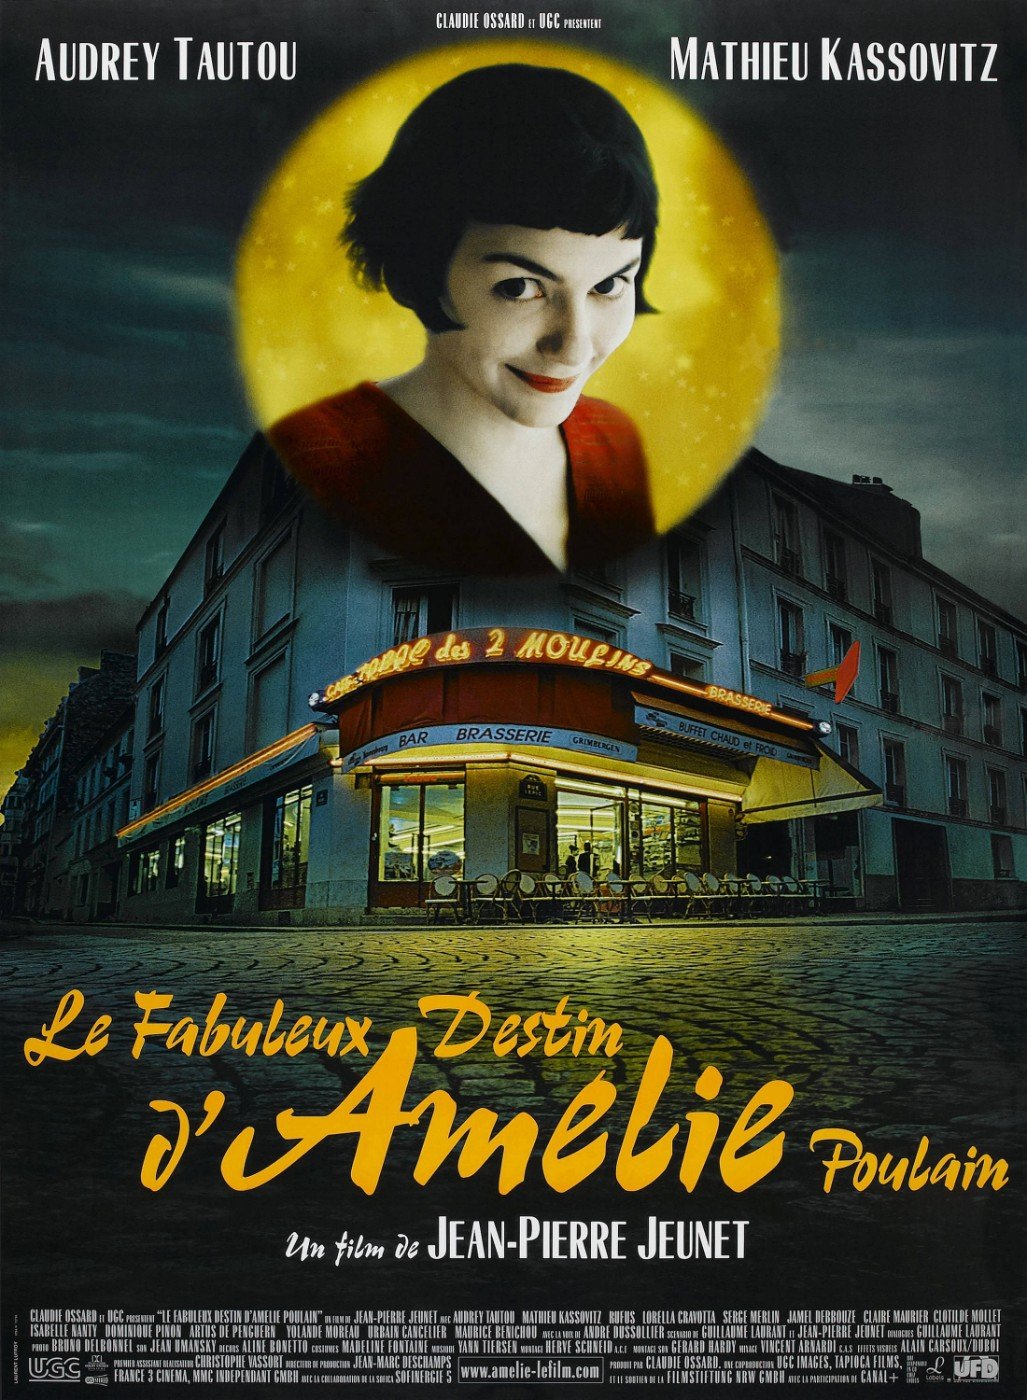 Movie Poster Art Amelie Audreytautou Life Size Posters By Joel Jerry Buy Posters Frames Canvas Digital Art Prints Small Compact Medium And Large Variants